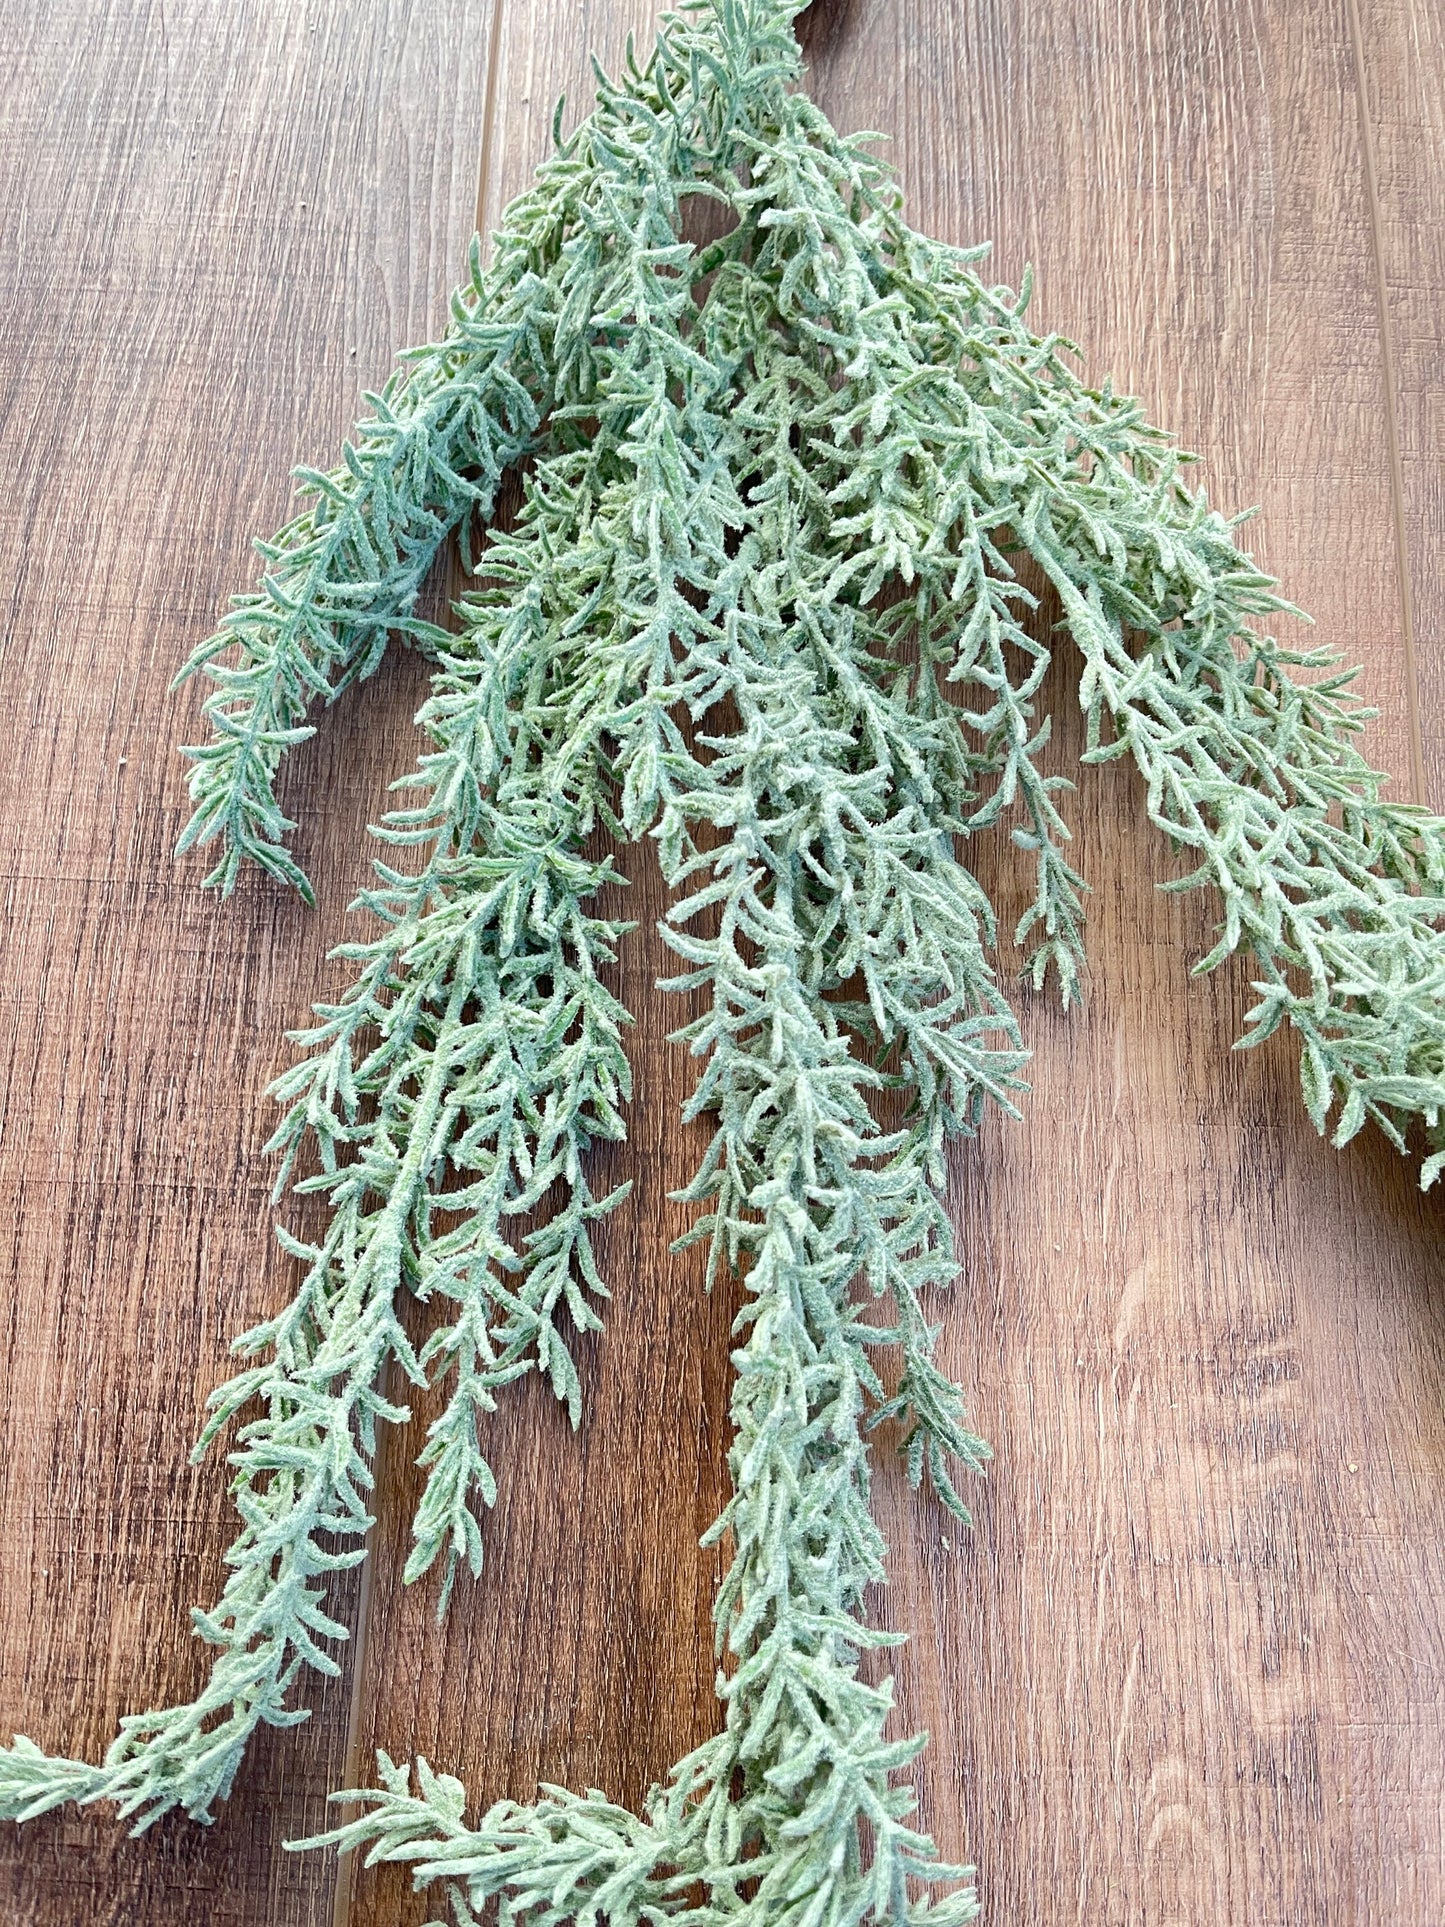 Natural Touch Rosemary Hanging Vine, Leaf Spray, Greenery, Floral Supplies, Minimalist Decor, Wreath Embellishments, Craft Supply